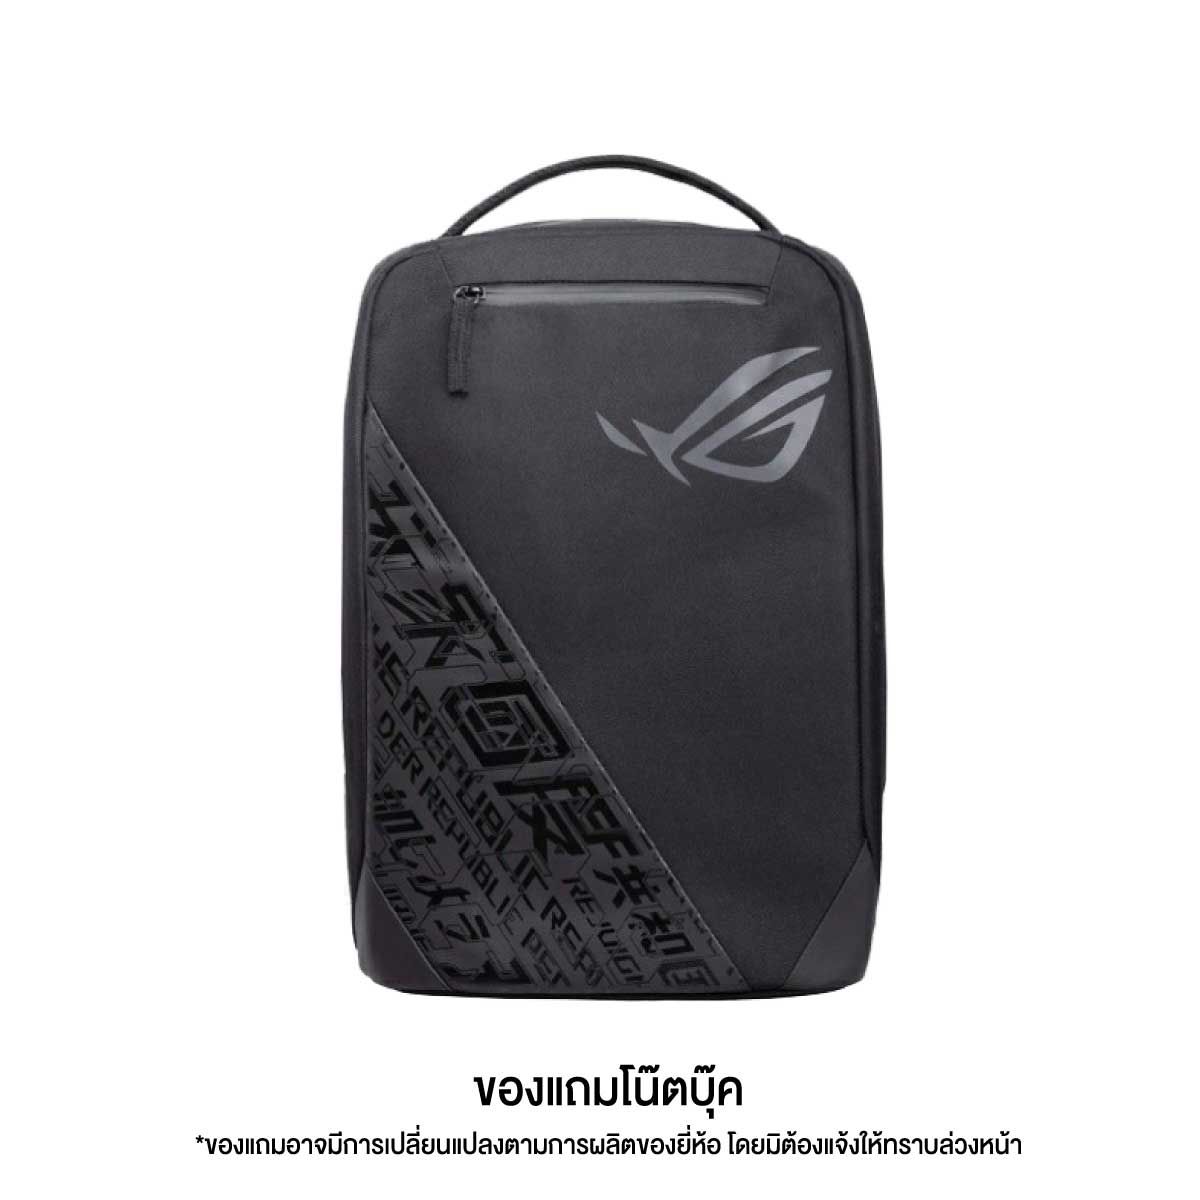 NOTEBOOK (โน้ตบุ๊ค) ASUS TUF GAMING A16 ADVANTAGE EDITION FA617NS-N3085W (SANDSTORM)